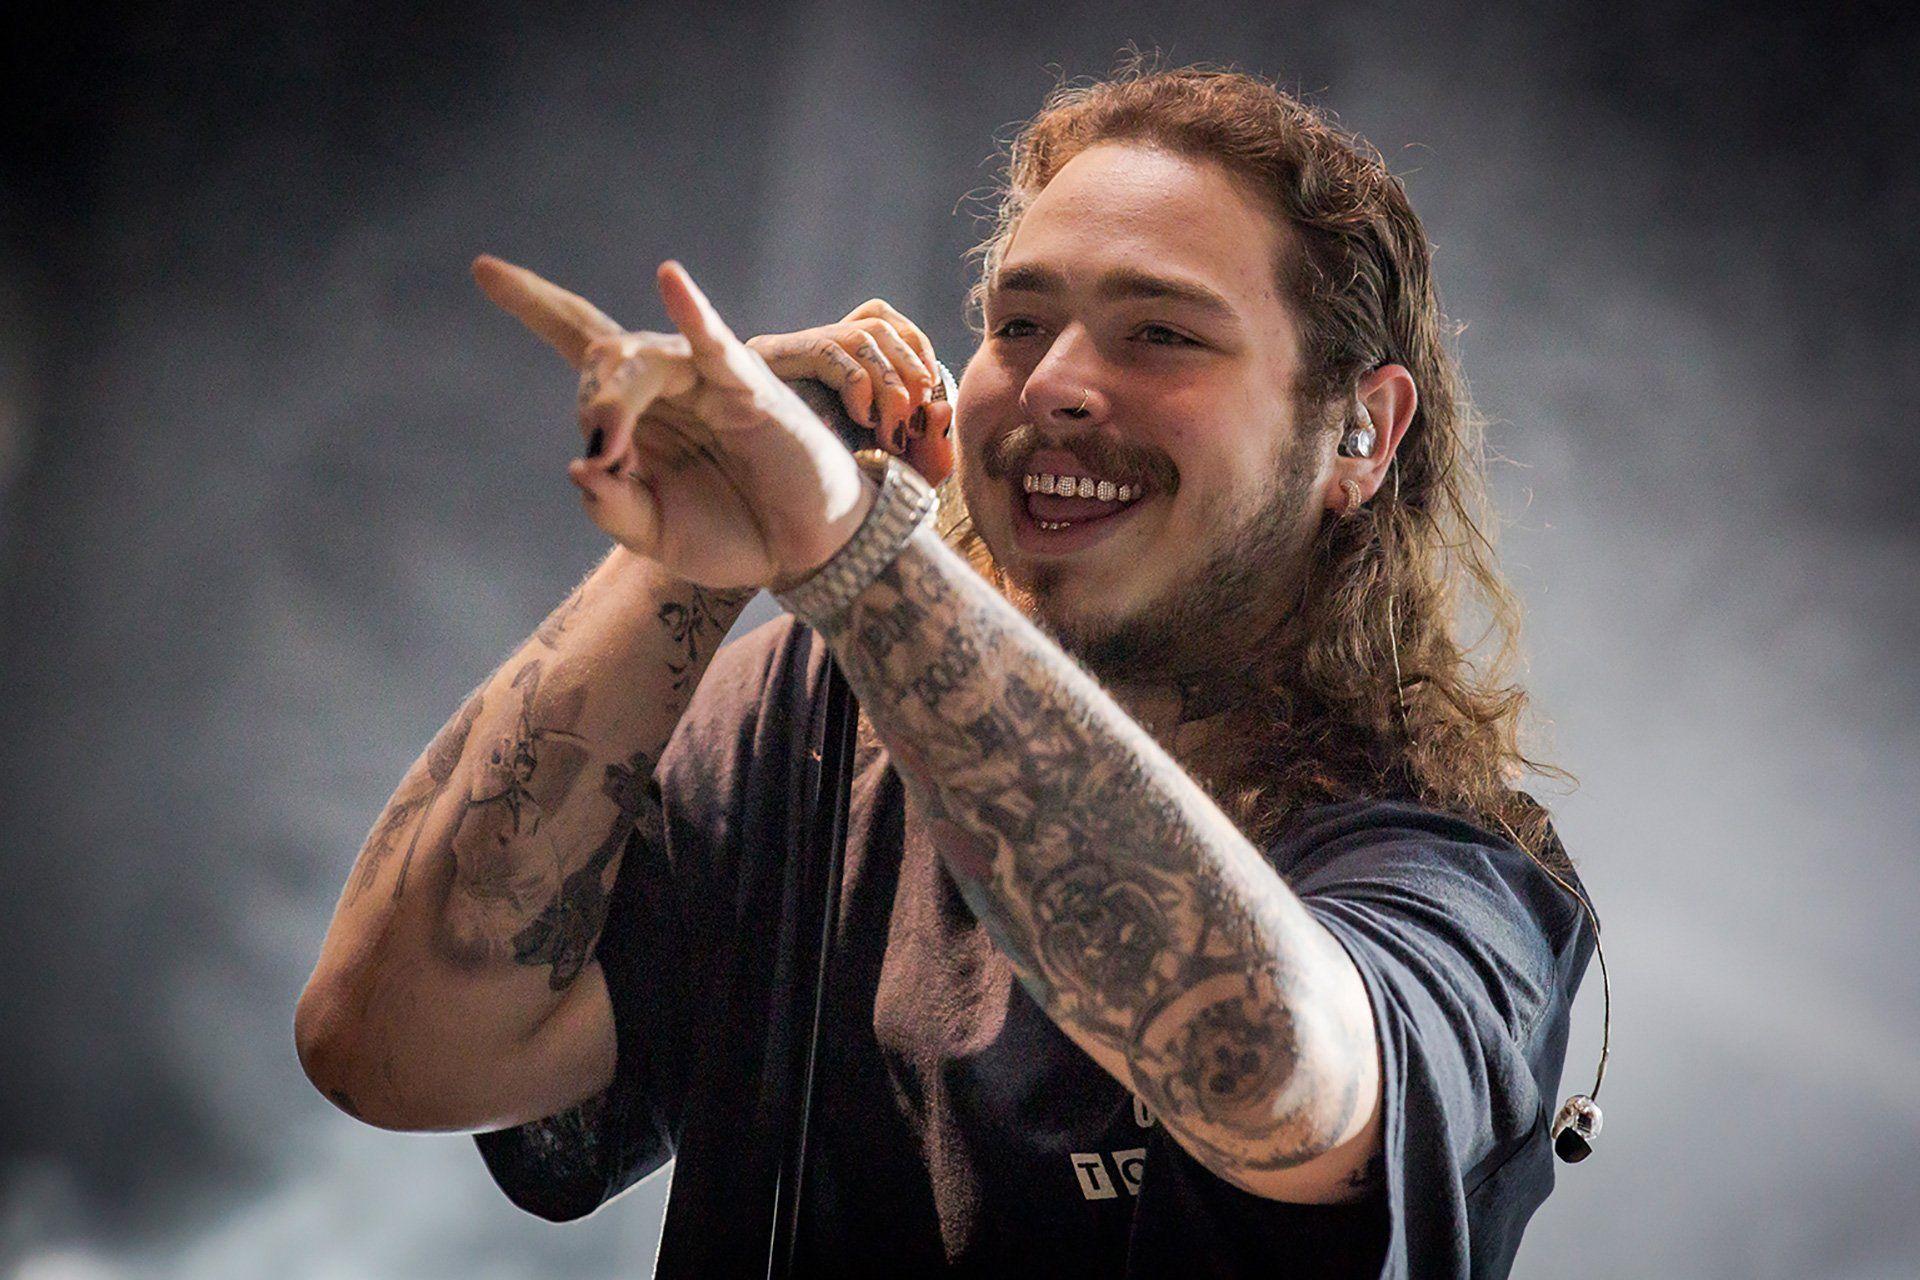 Post Malone HD Wallpapers Top Free Post Malone HD Backgrounds